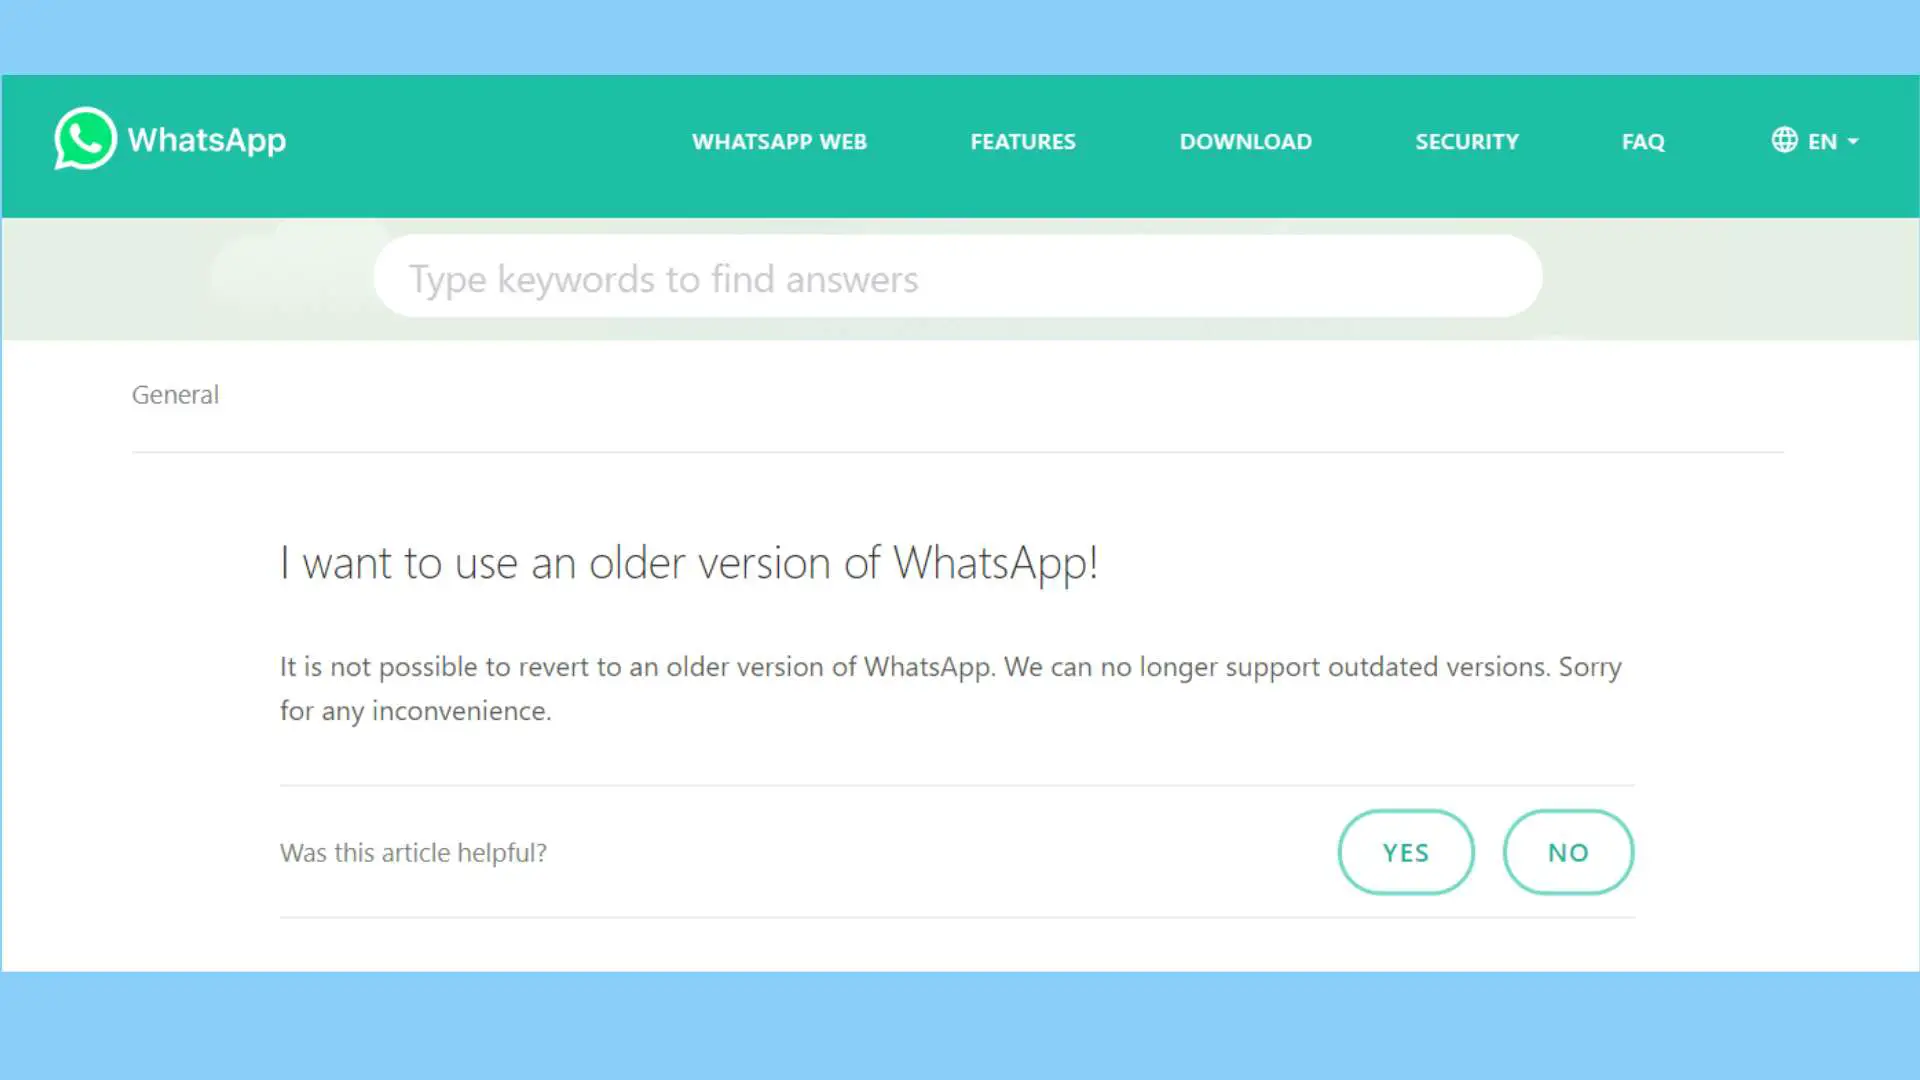 Can You Roll Back To The Previous Version Of WhatsApp